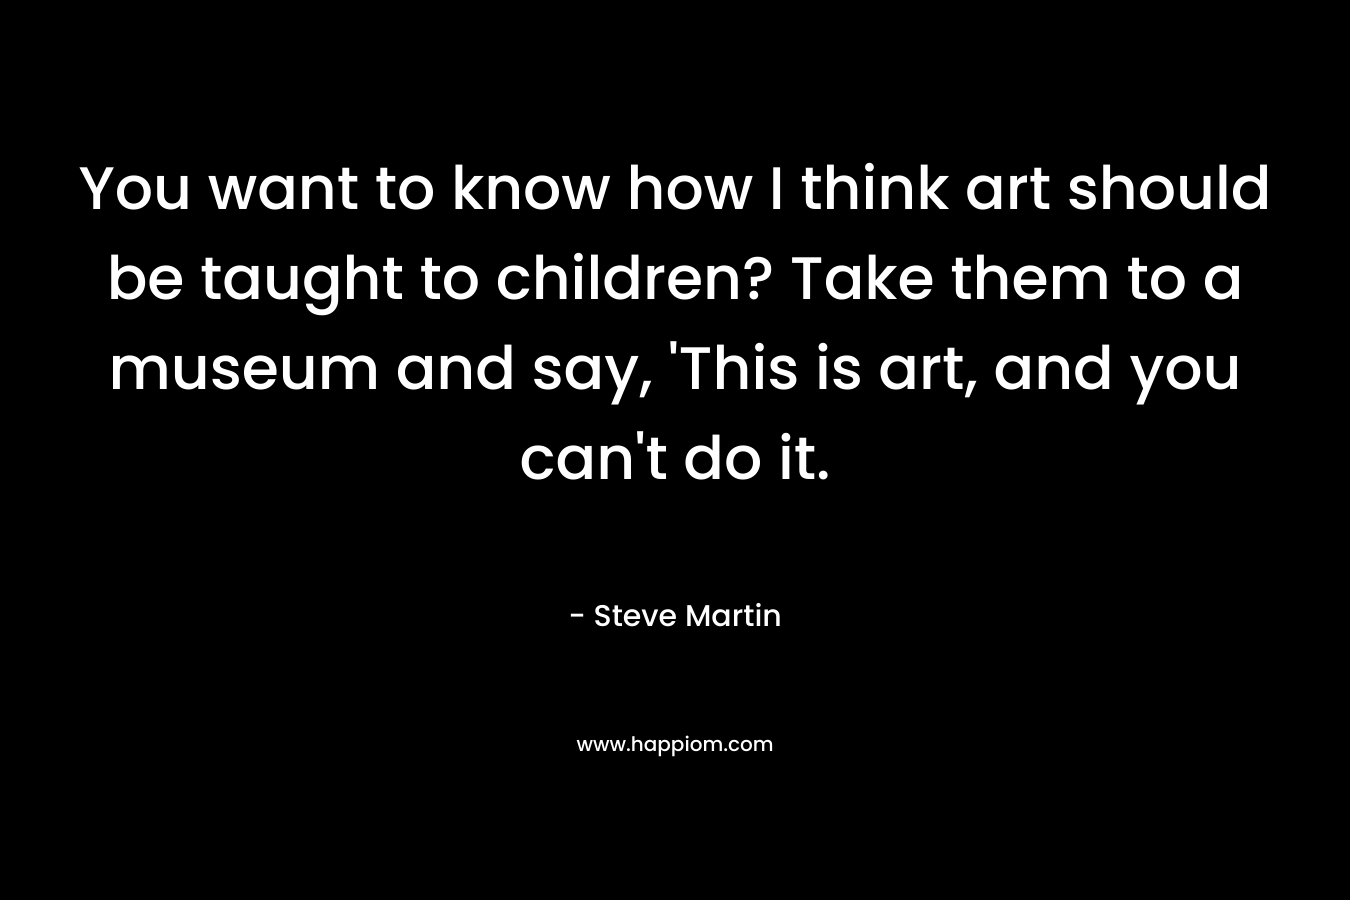 You want to know how I think art should be taught to children? Take them to a museum and say, 'This is art, and you can't do it.